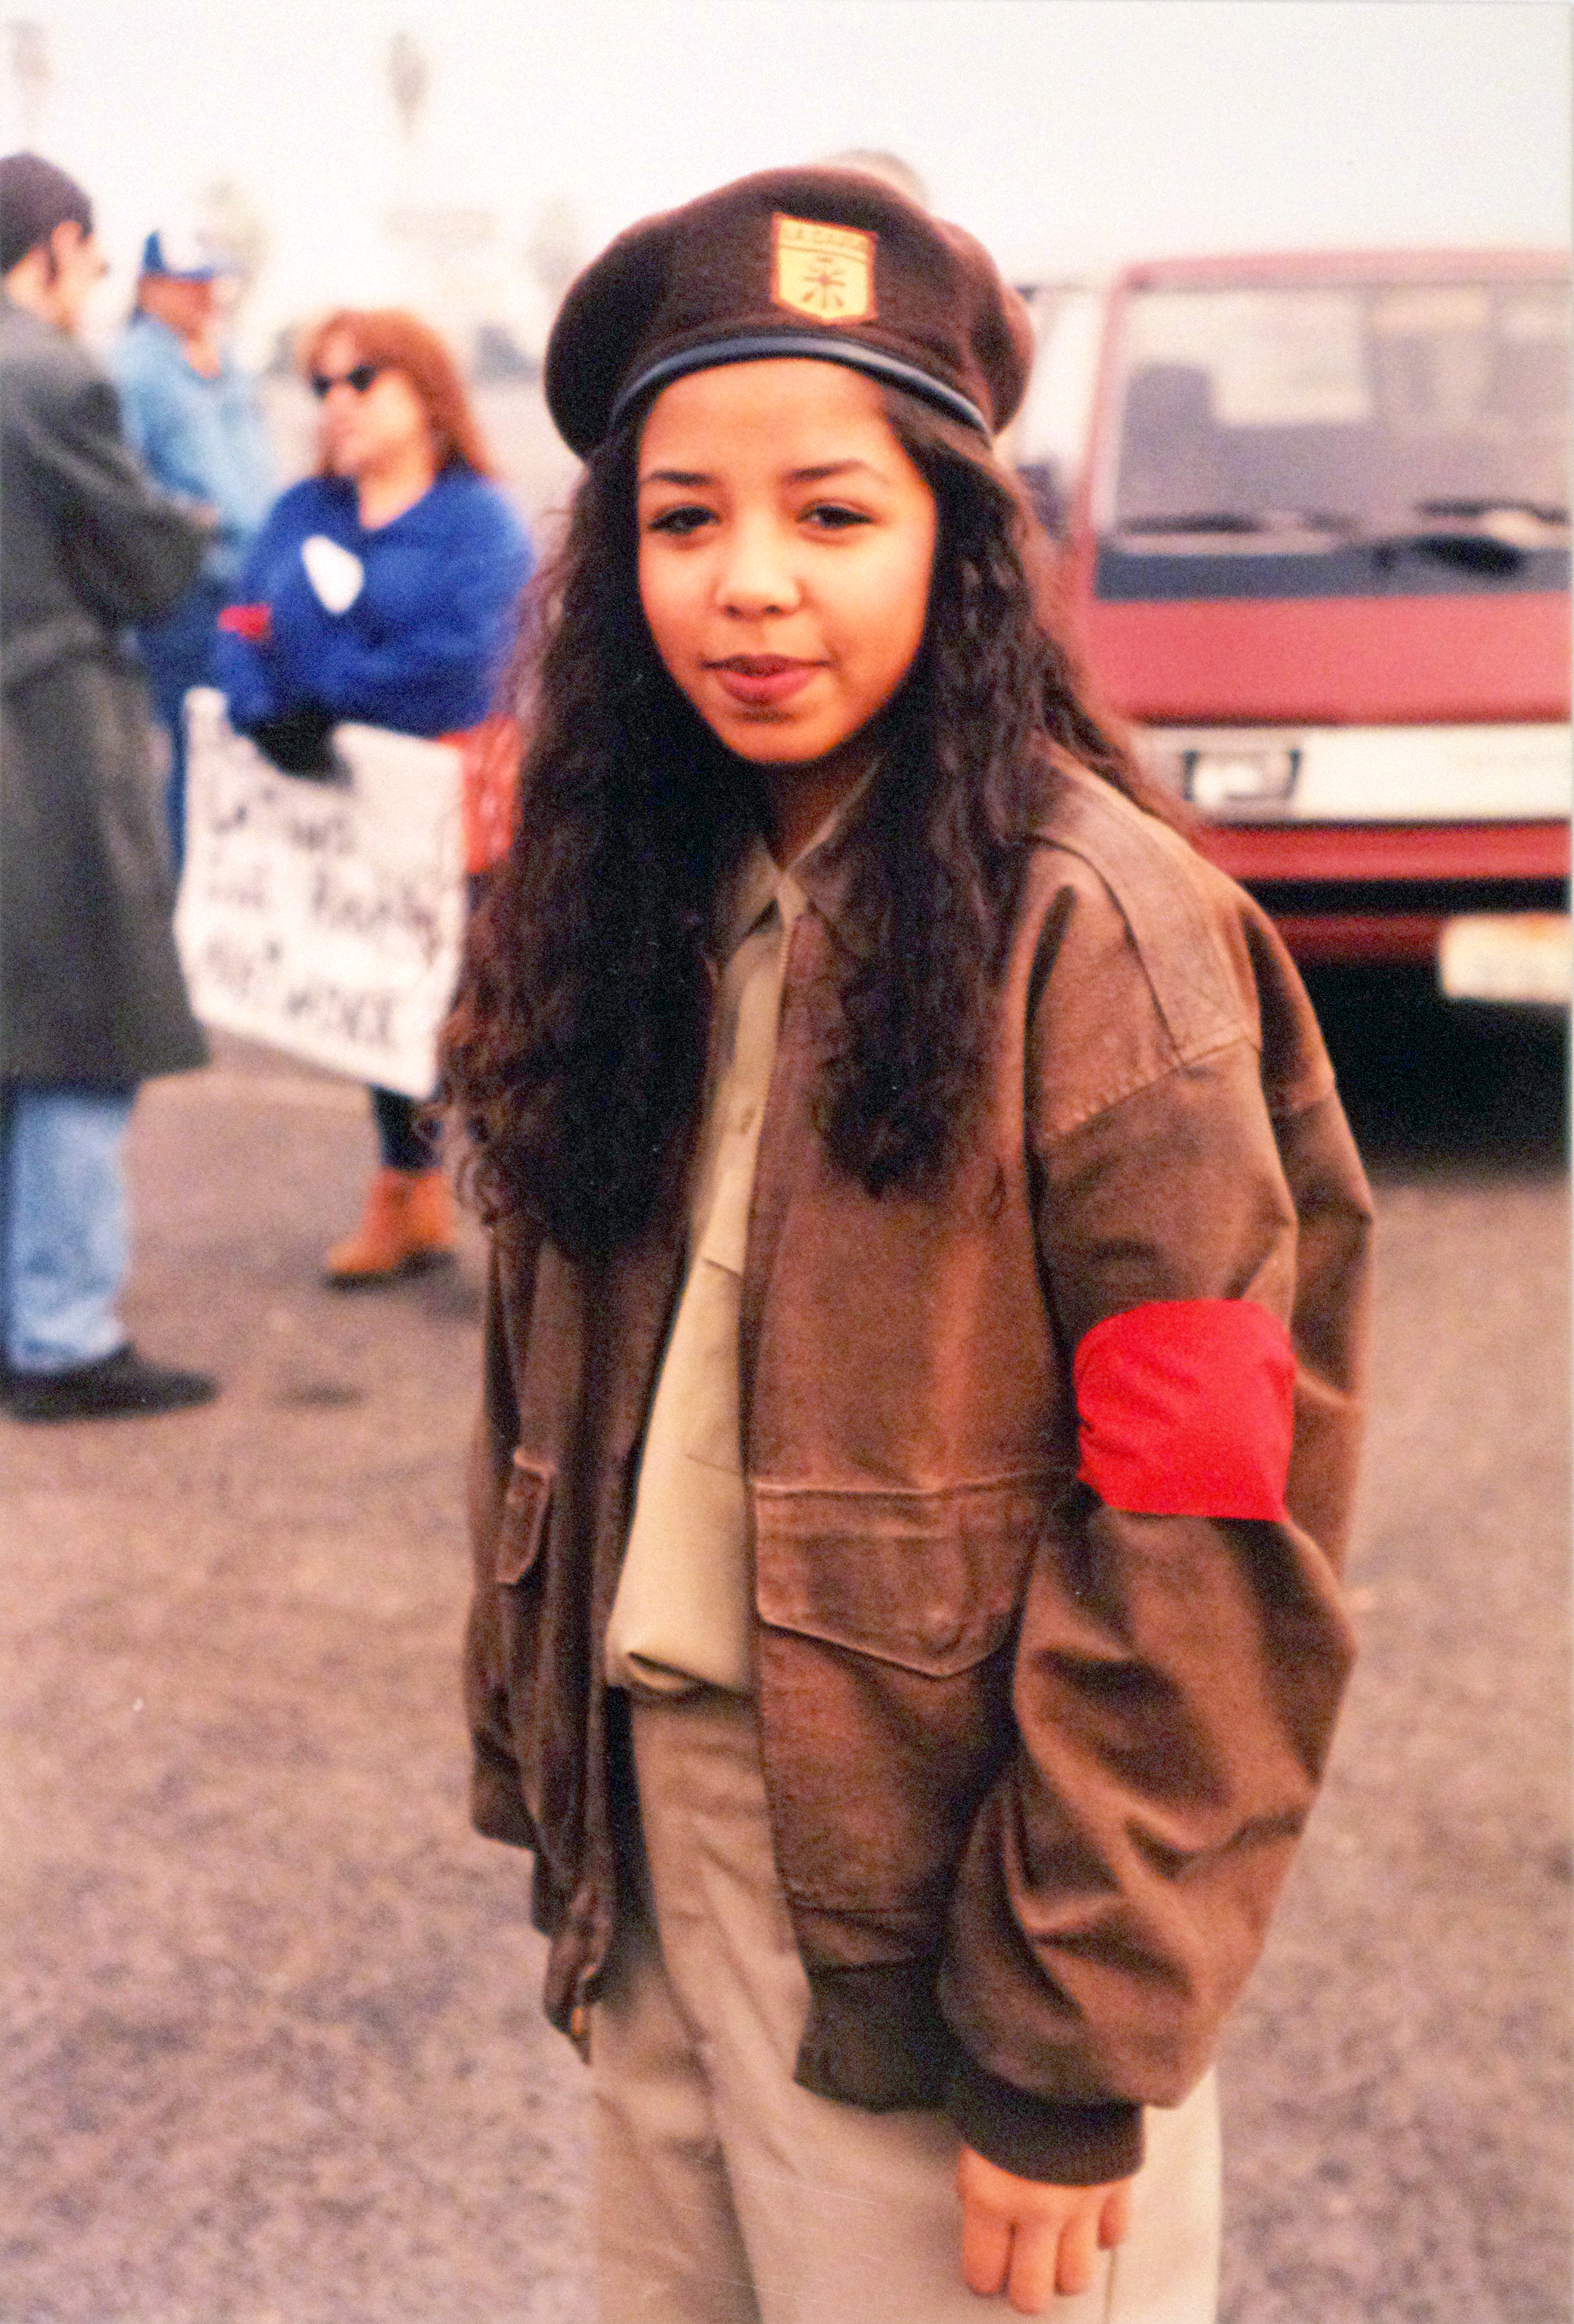 A girl wearing a brown beret uniform in preparation for a protest